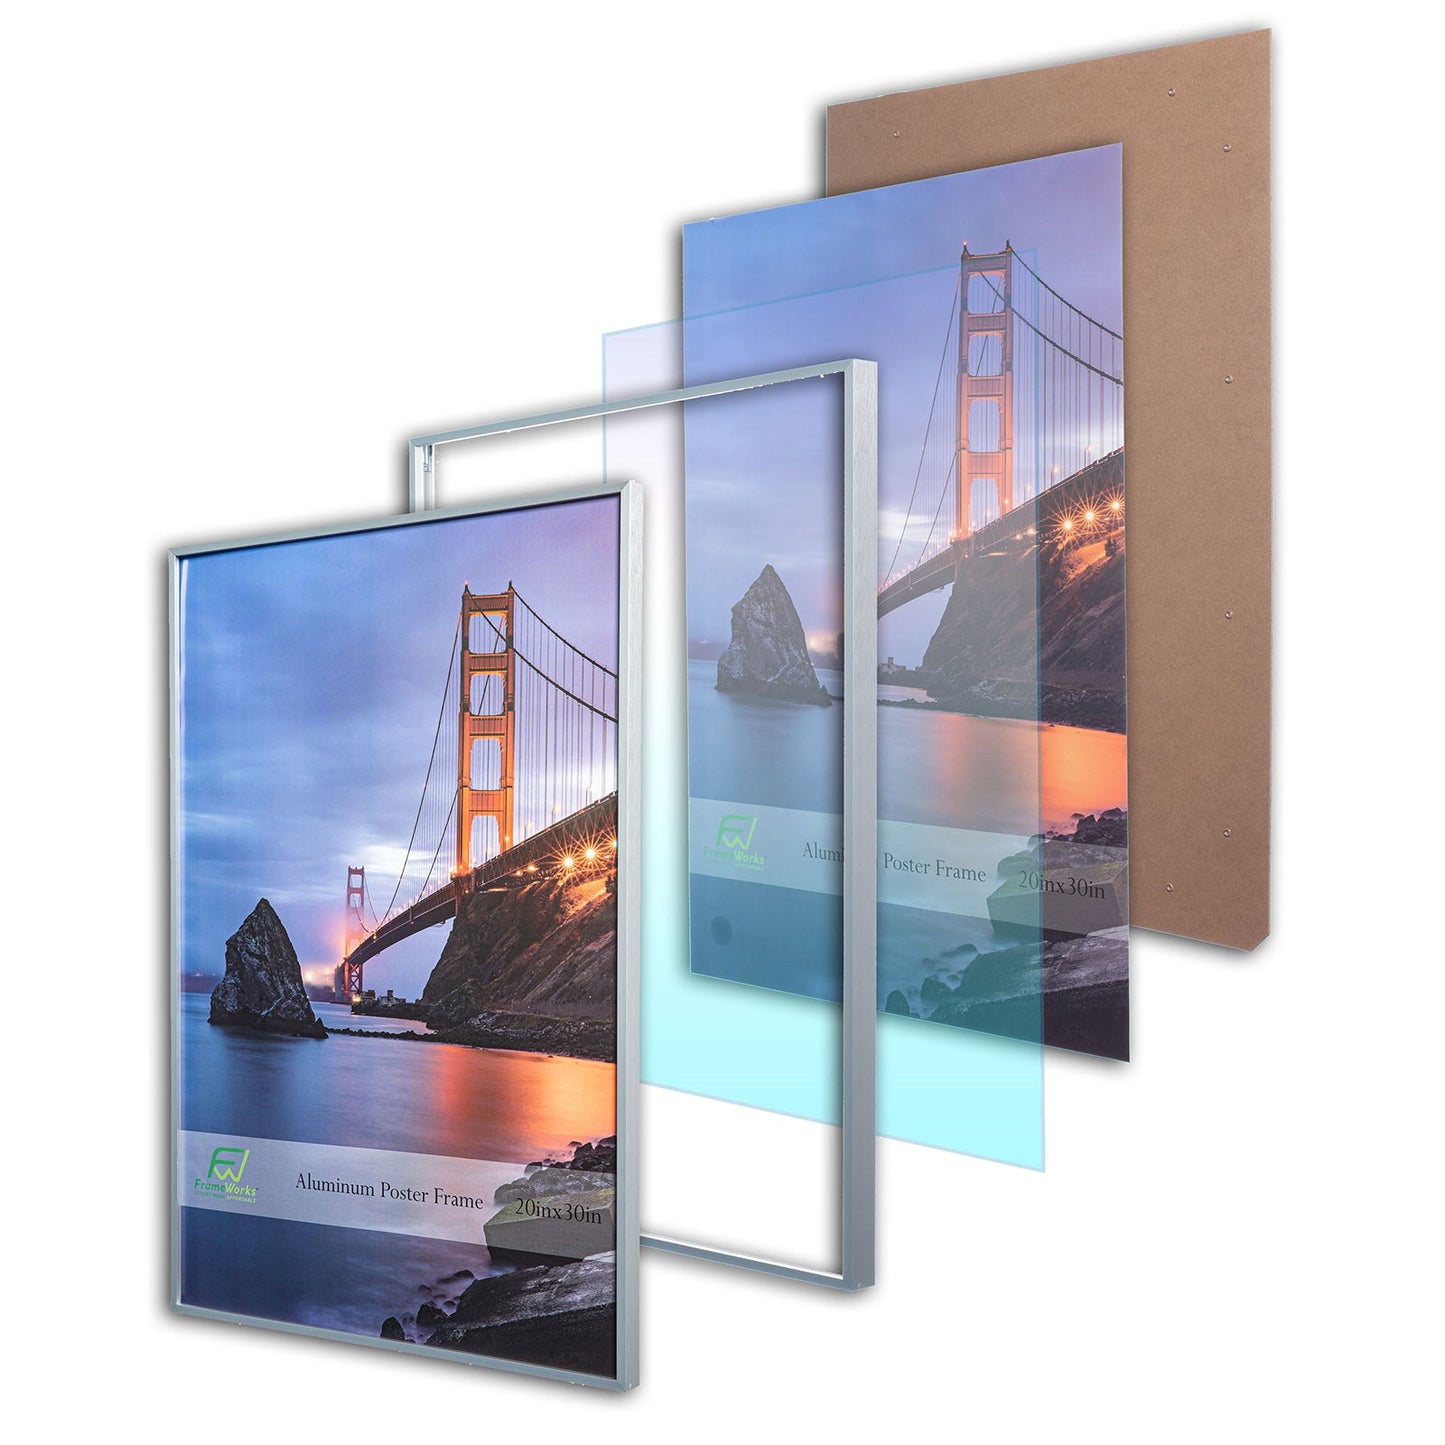 20" x 30" Silver Brushed Aluminum Poster Picture Frame with Plexiglass